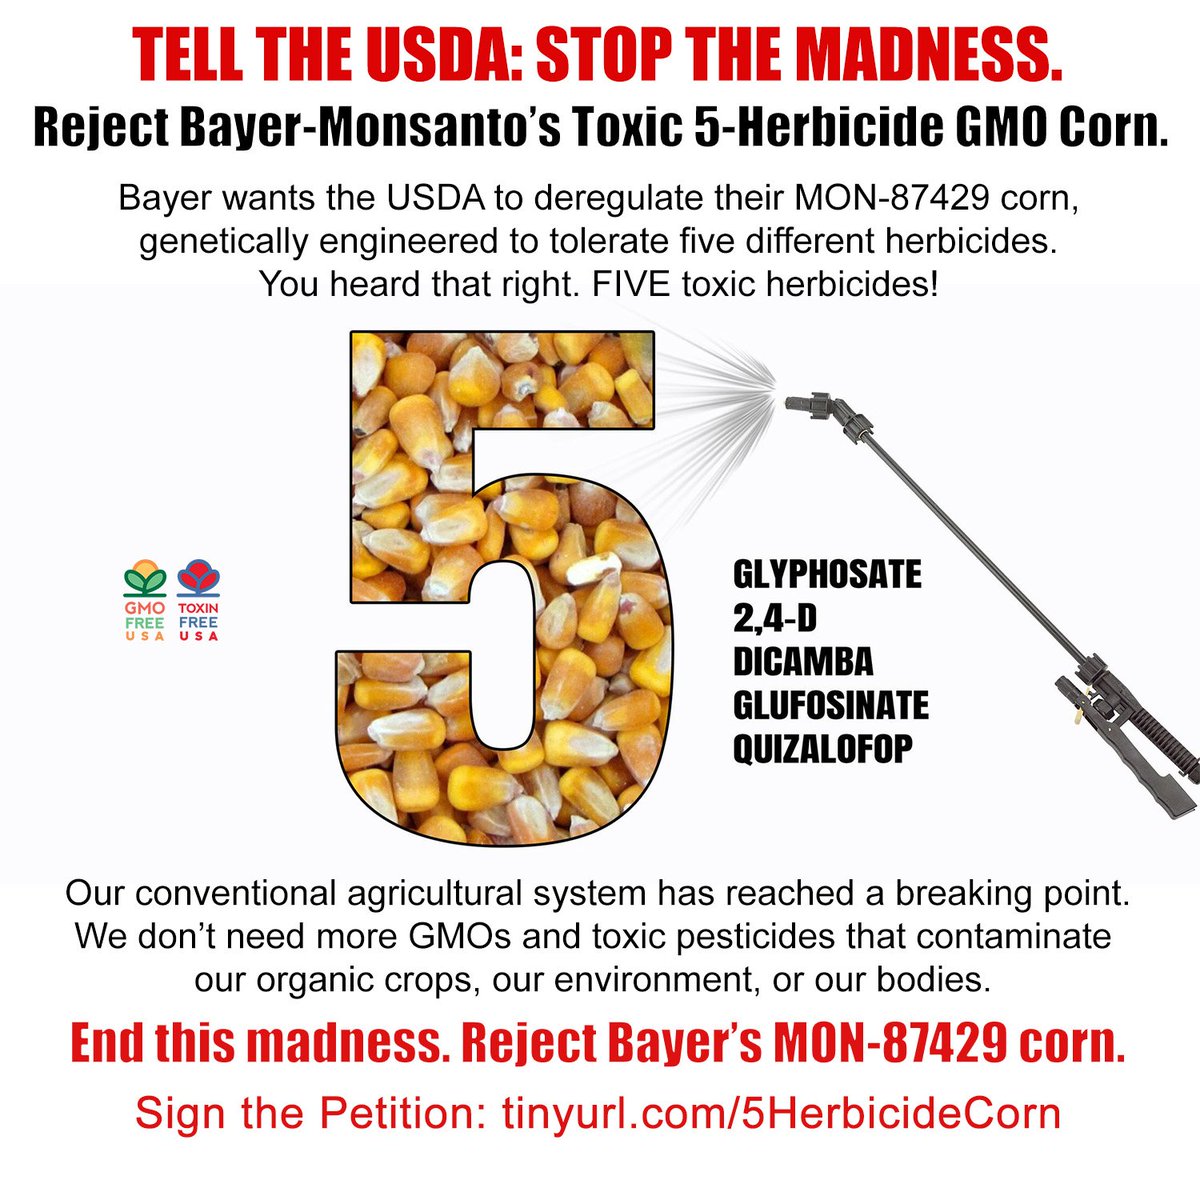 Bayer-Monsanto is piling on the poison to unimaginable levels. Industrial agriculture is out of control and must be stopped. Sign the Petition: Tell the USDA to Stop the Madness! Reject Bayer-Monsanto’s Toxic 5 Herbicide GMO Corn: tinyurl.com/5HerbicideCorn